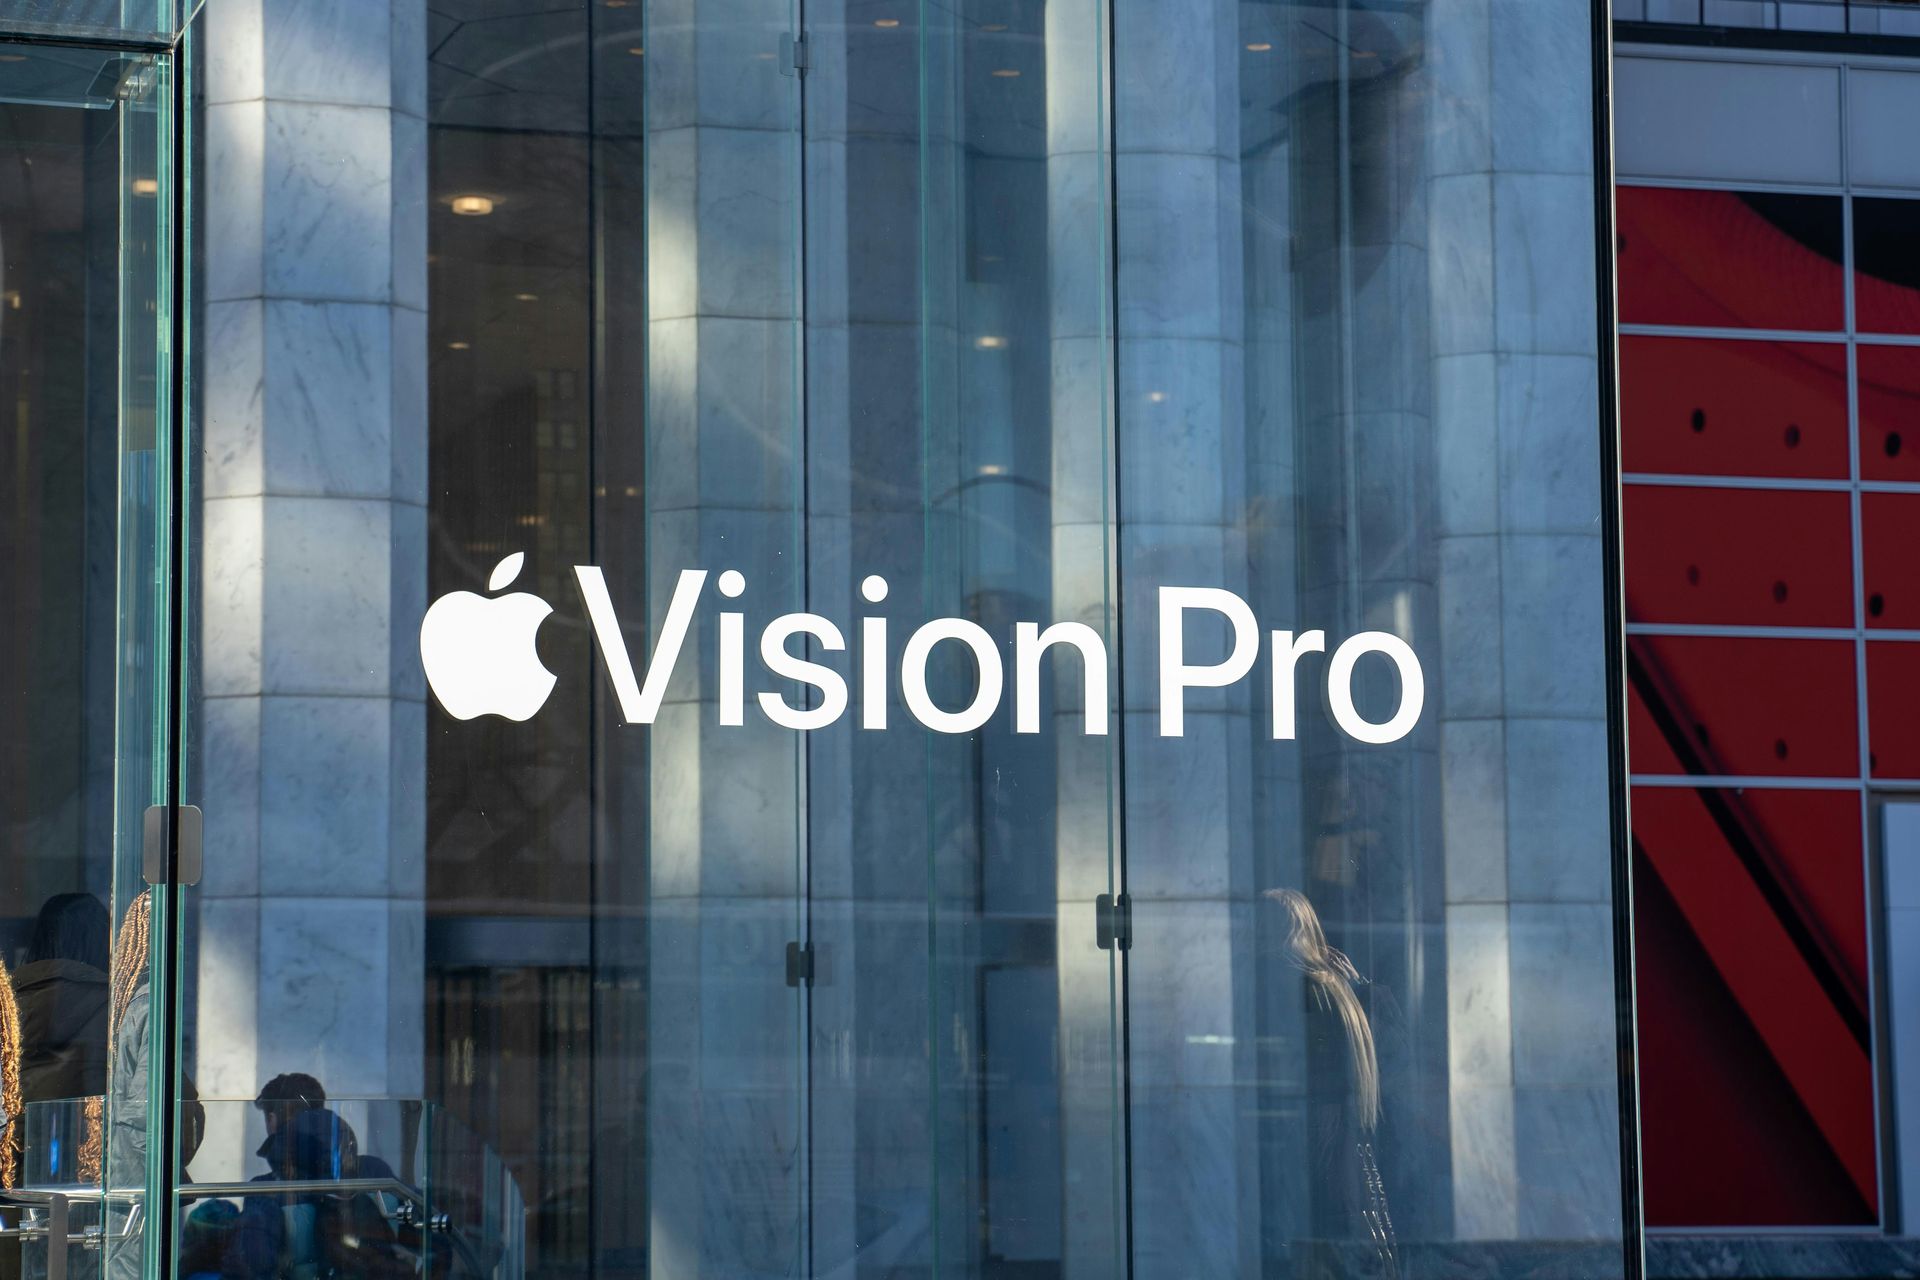 Apple says these Vision Pro apps could change healthcare